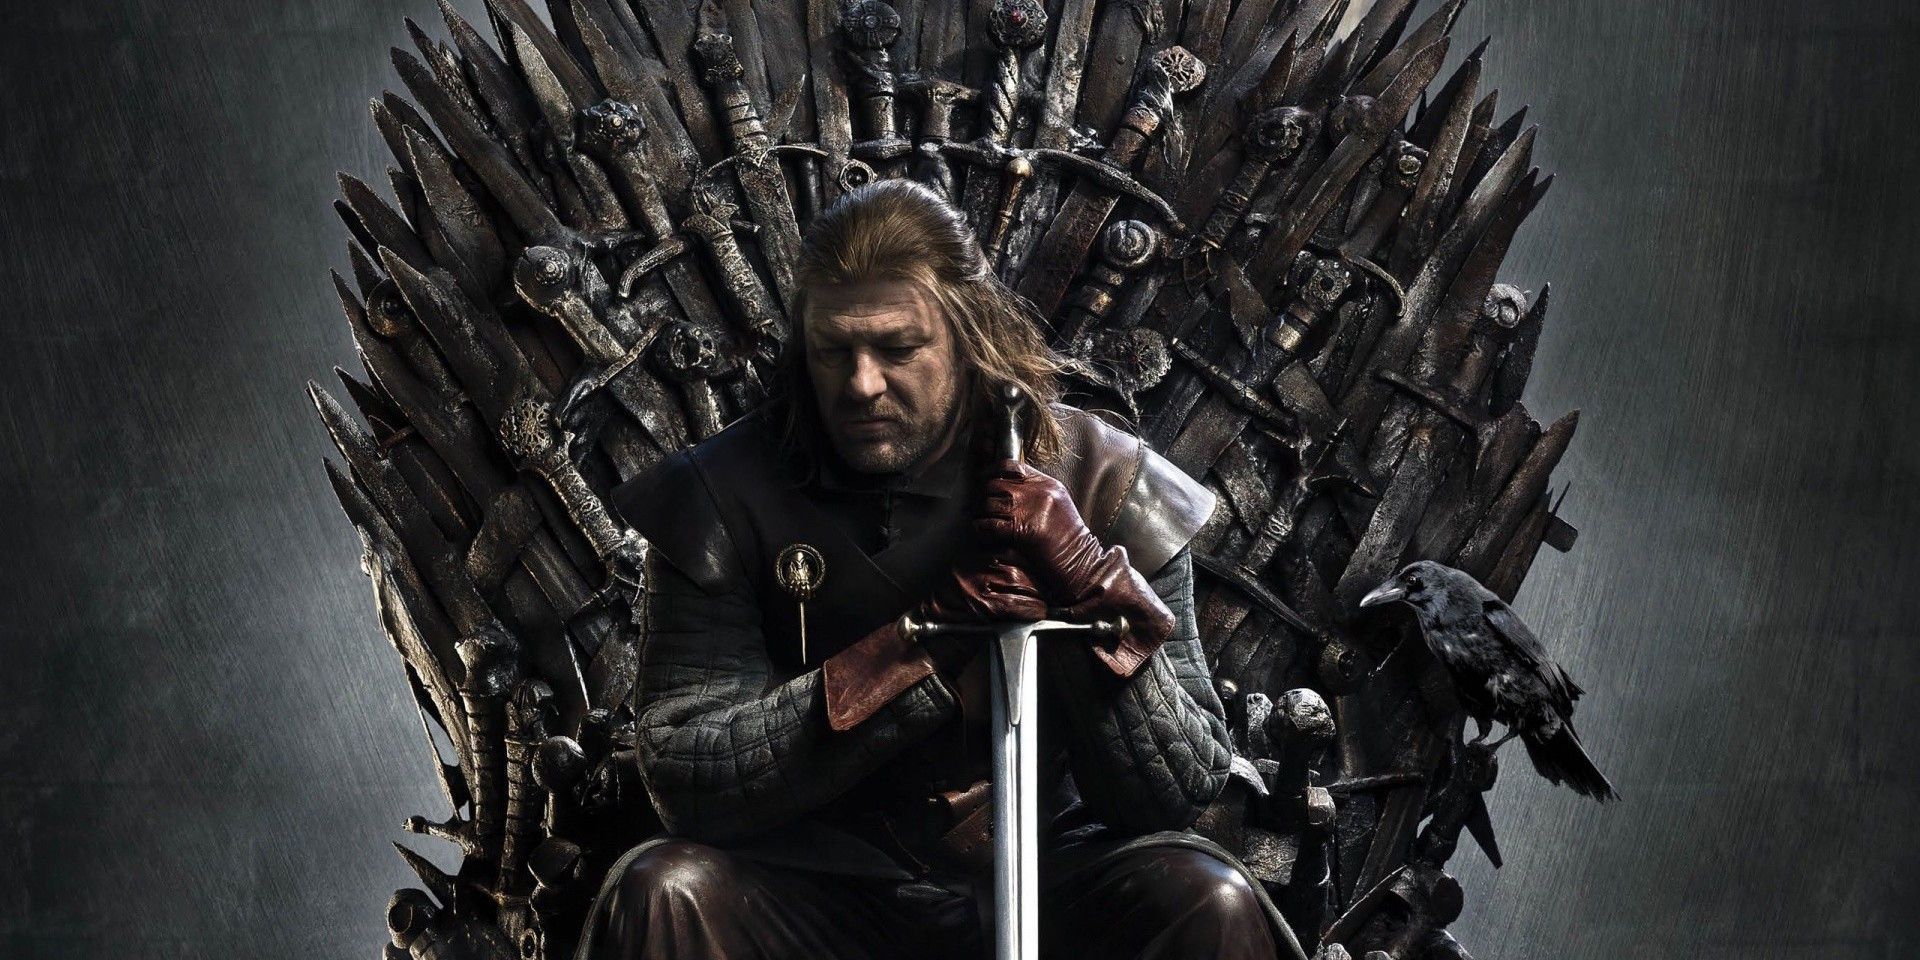 Sean Bean as Ned Stark on the Iron Throne in a promo image for Game of Thrones.